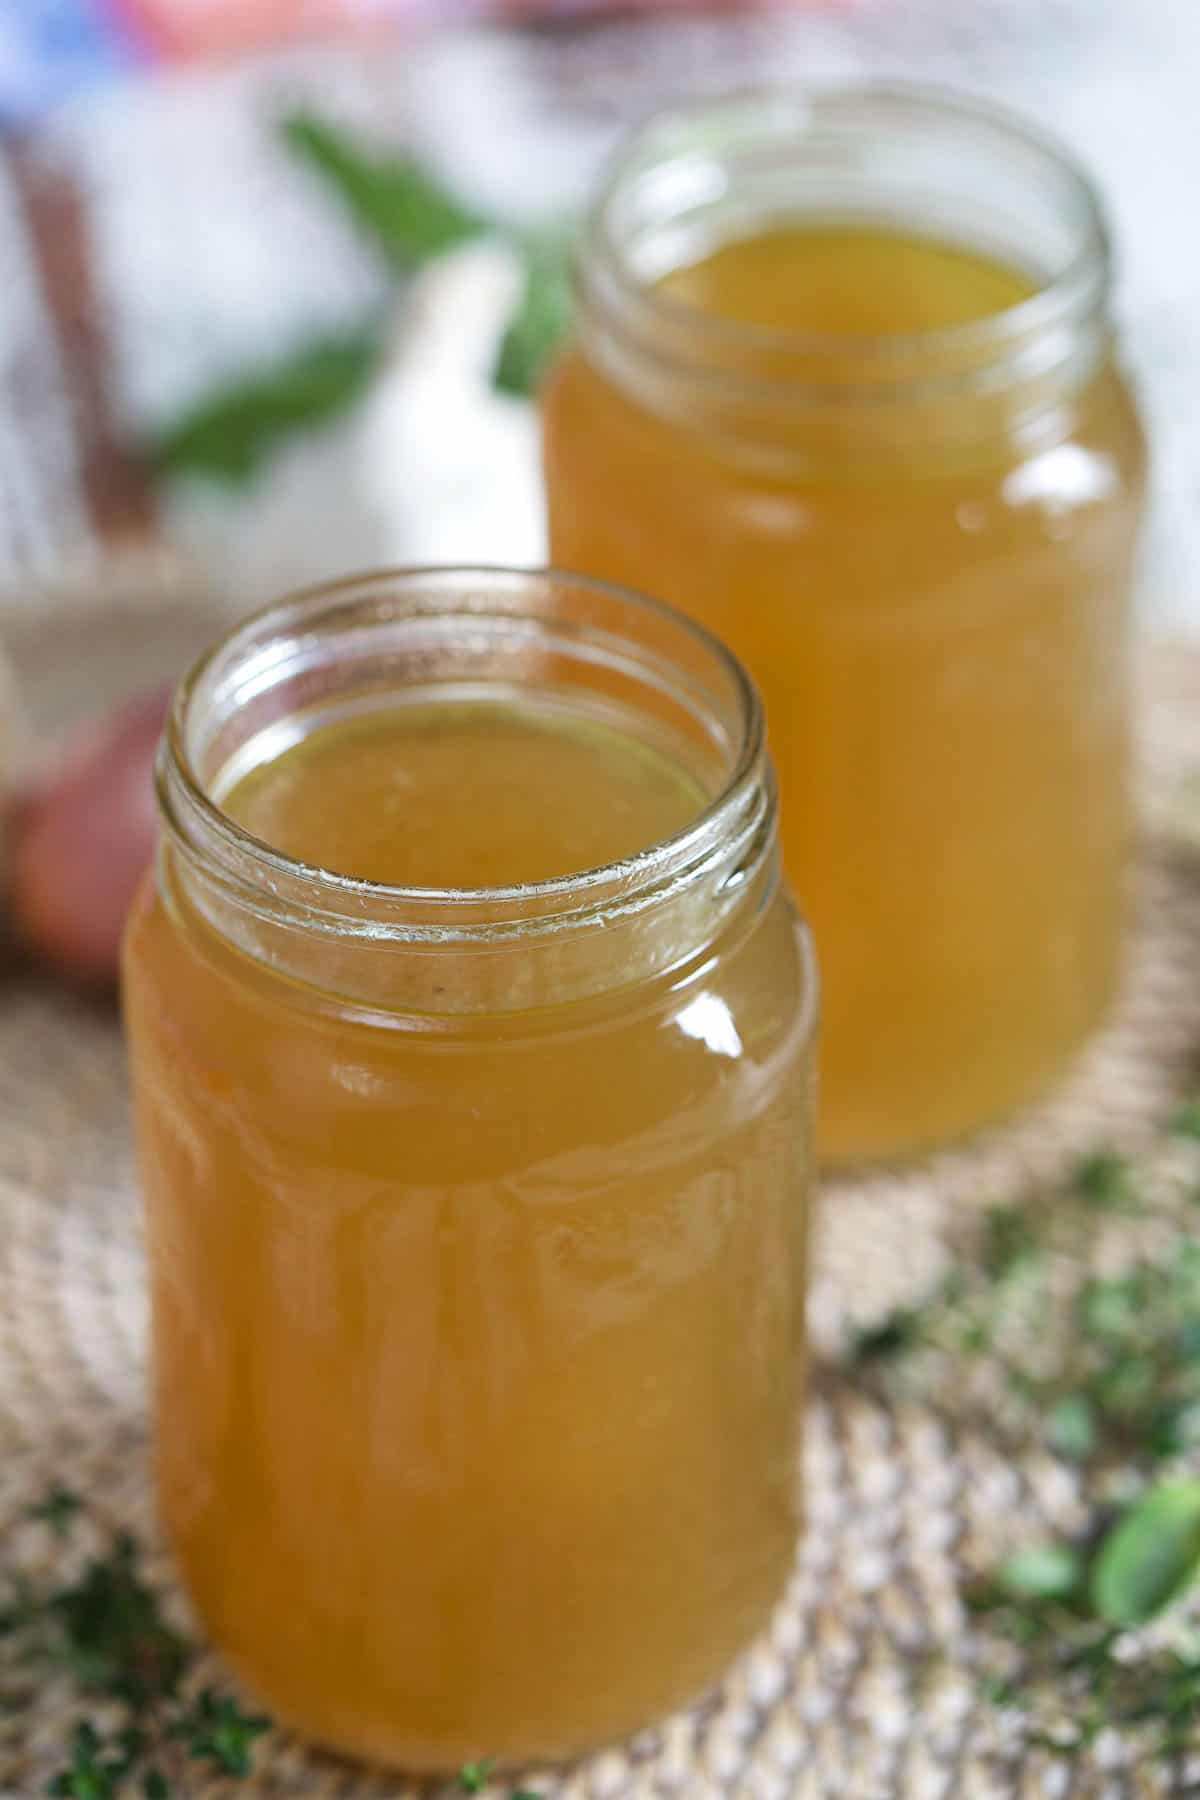 Two open glass jars are filled with turkey broth.